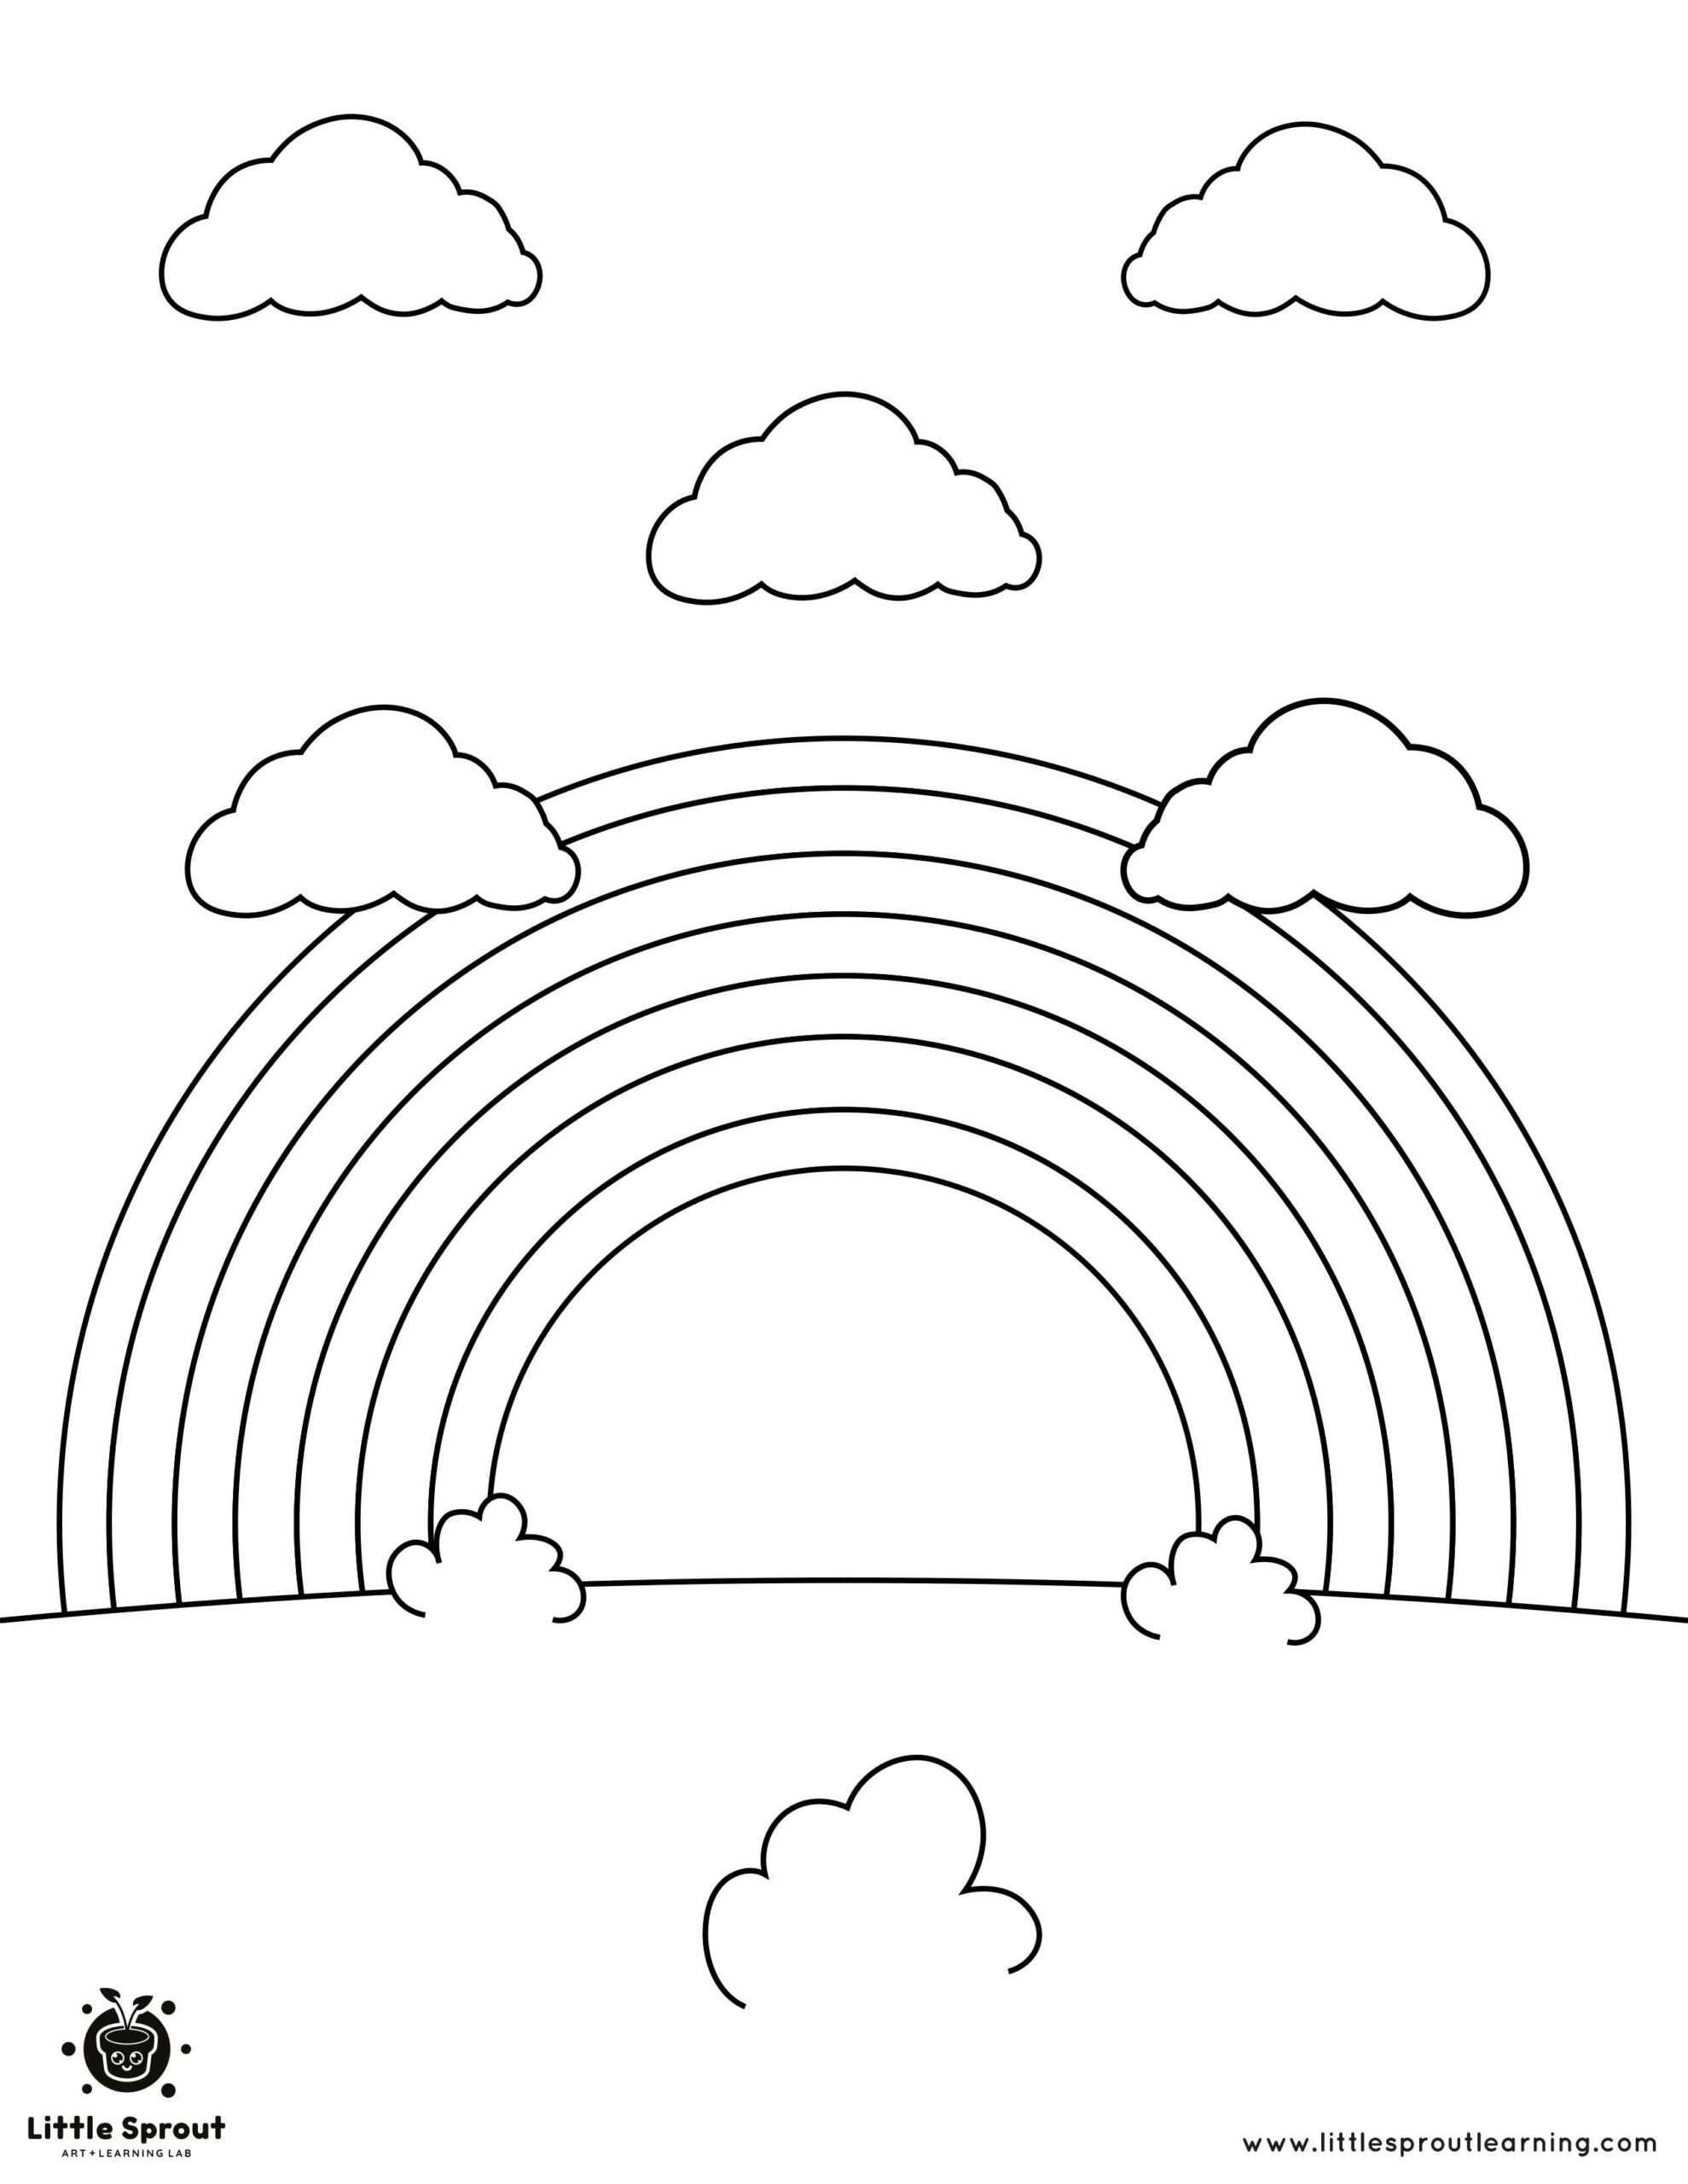 Cloud rainbow Coloring Page